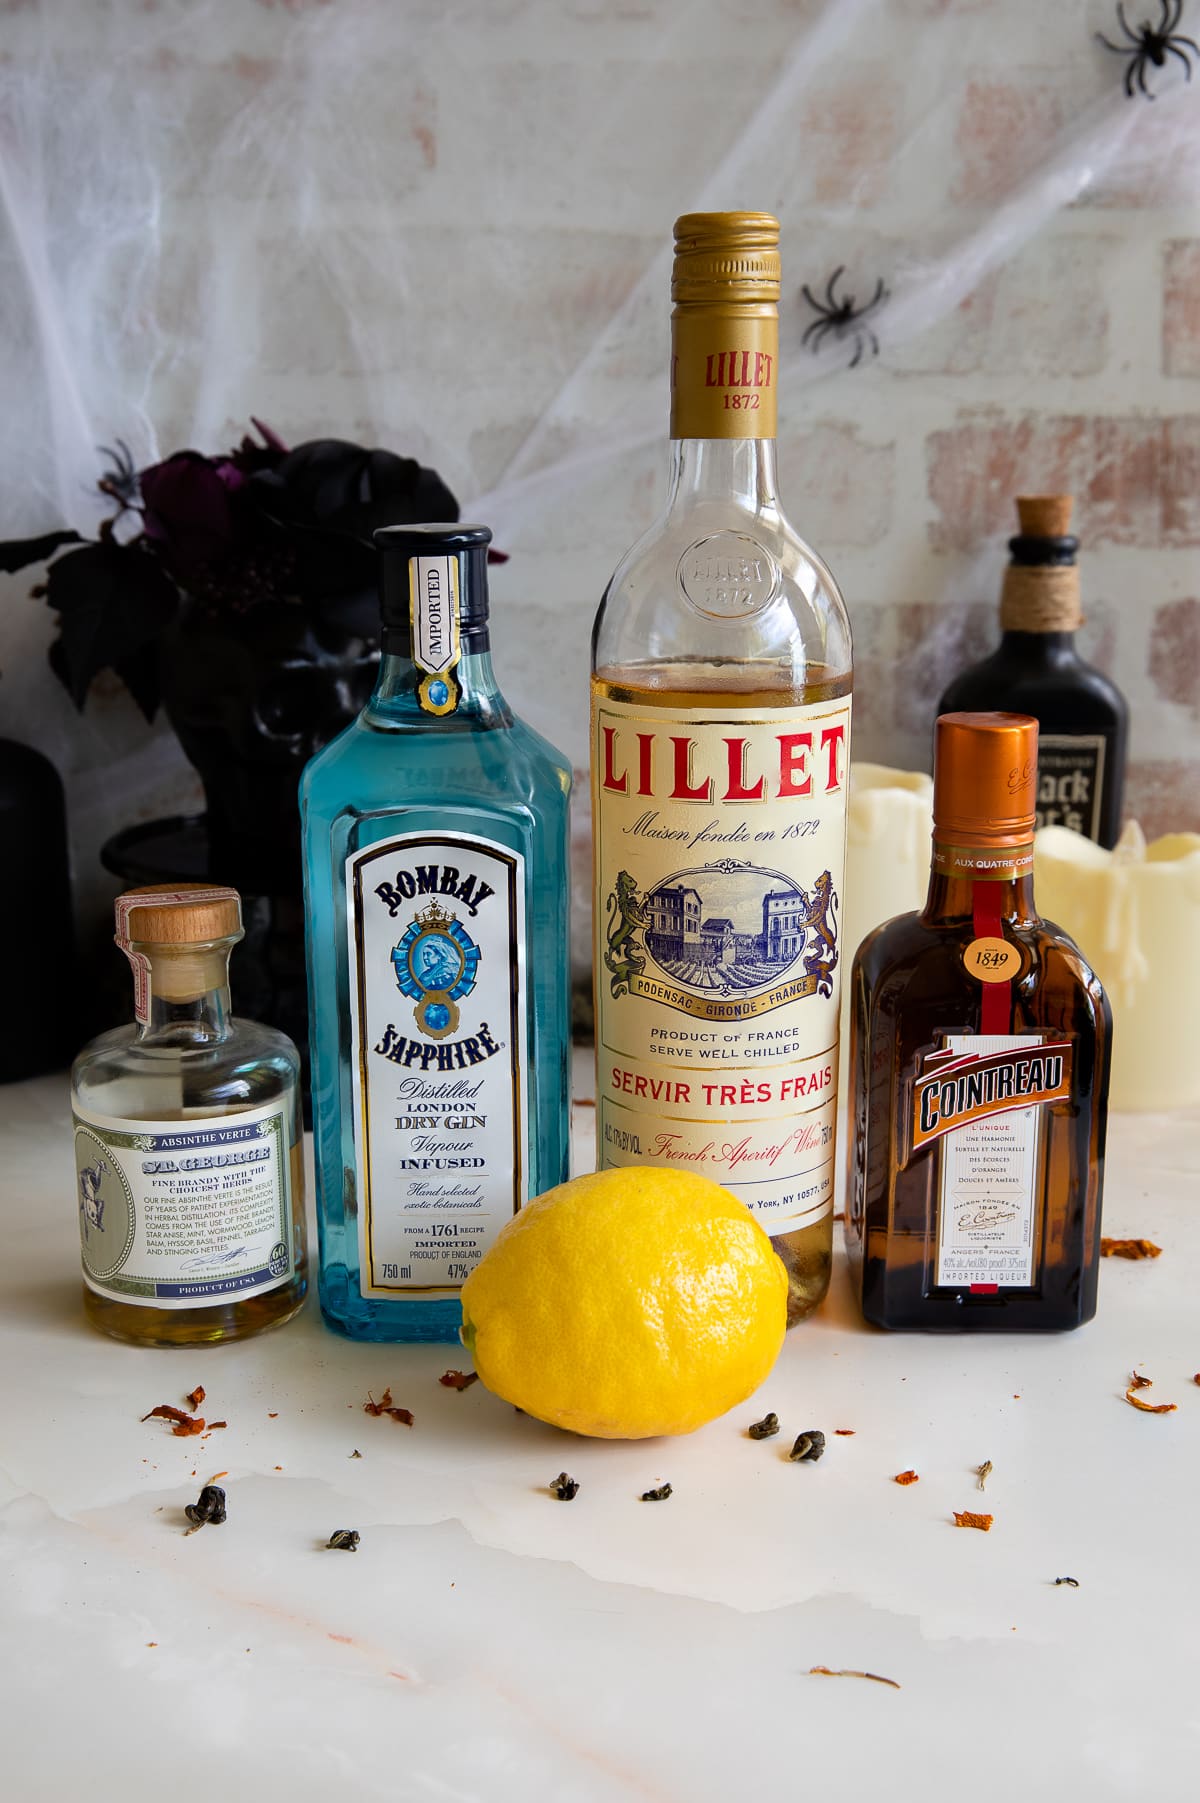 corpse reviver no 2 ingredients of lillet blanc, lemon juice, gin, Cointreau, and absinthe.